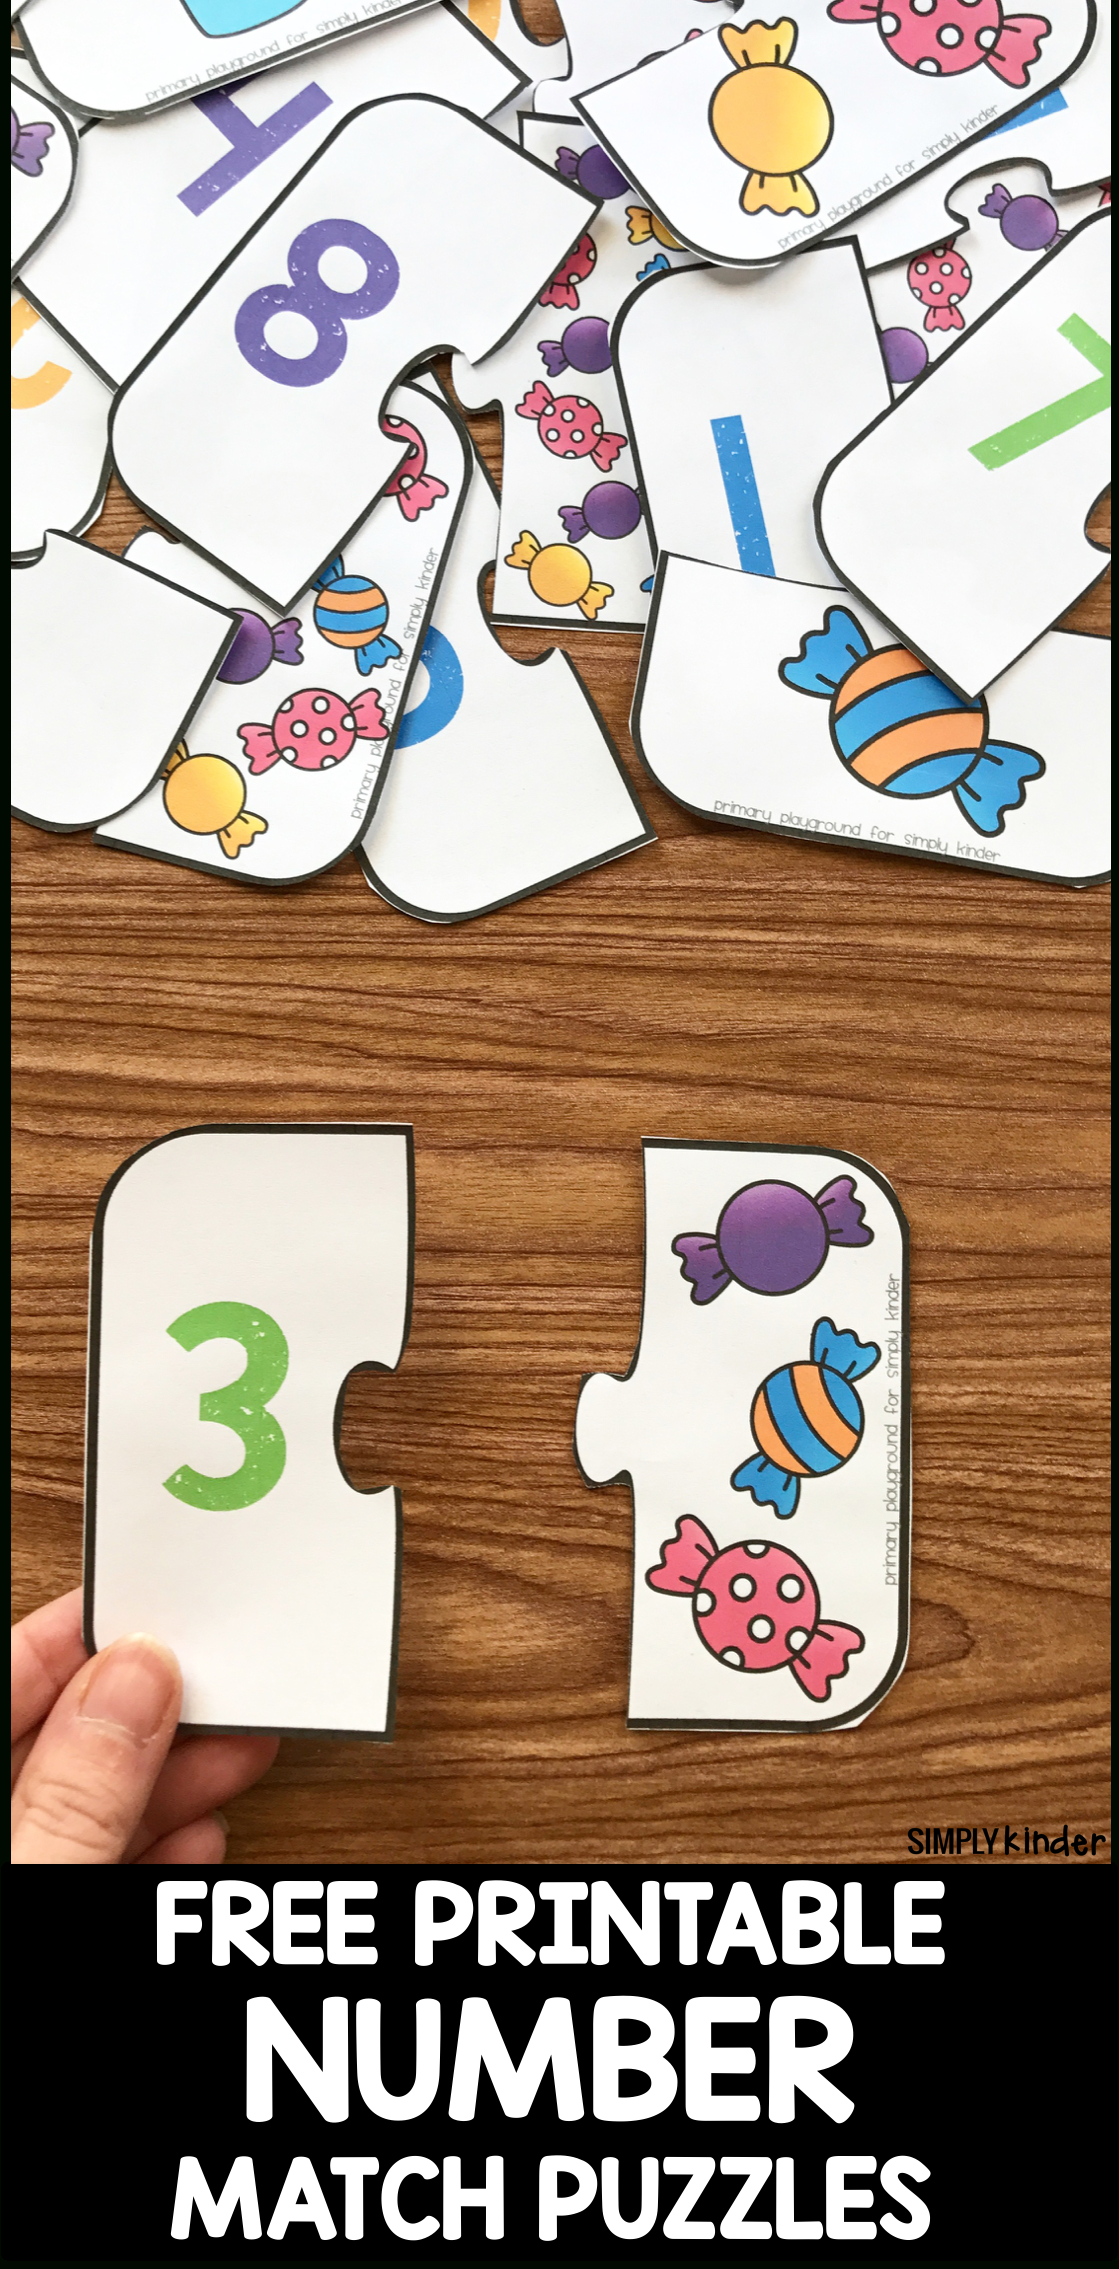 Free Printable Number Match Puzzles | Numbers | Simply Kinder, Free - Printable Matching Puzzle